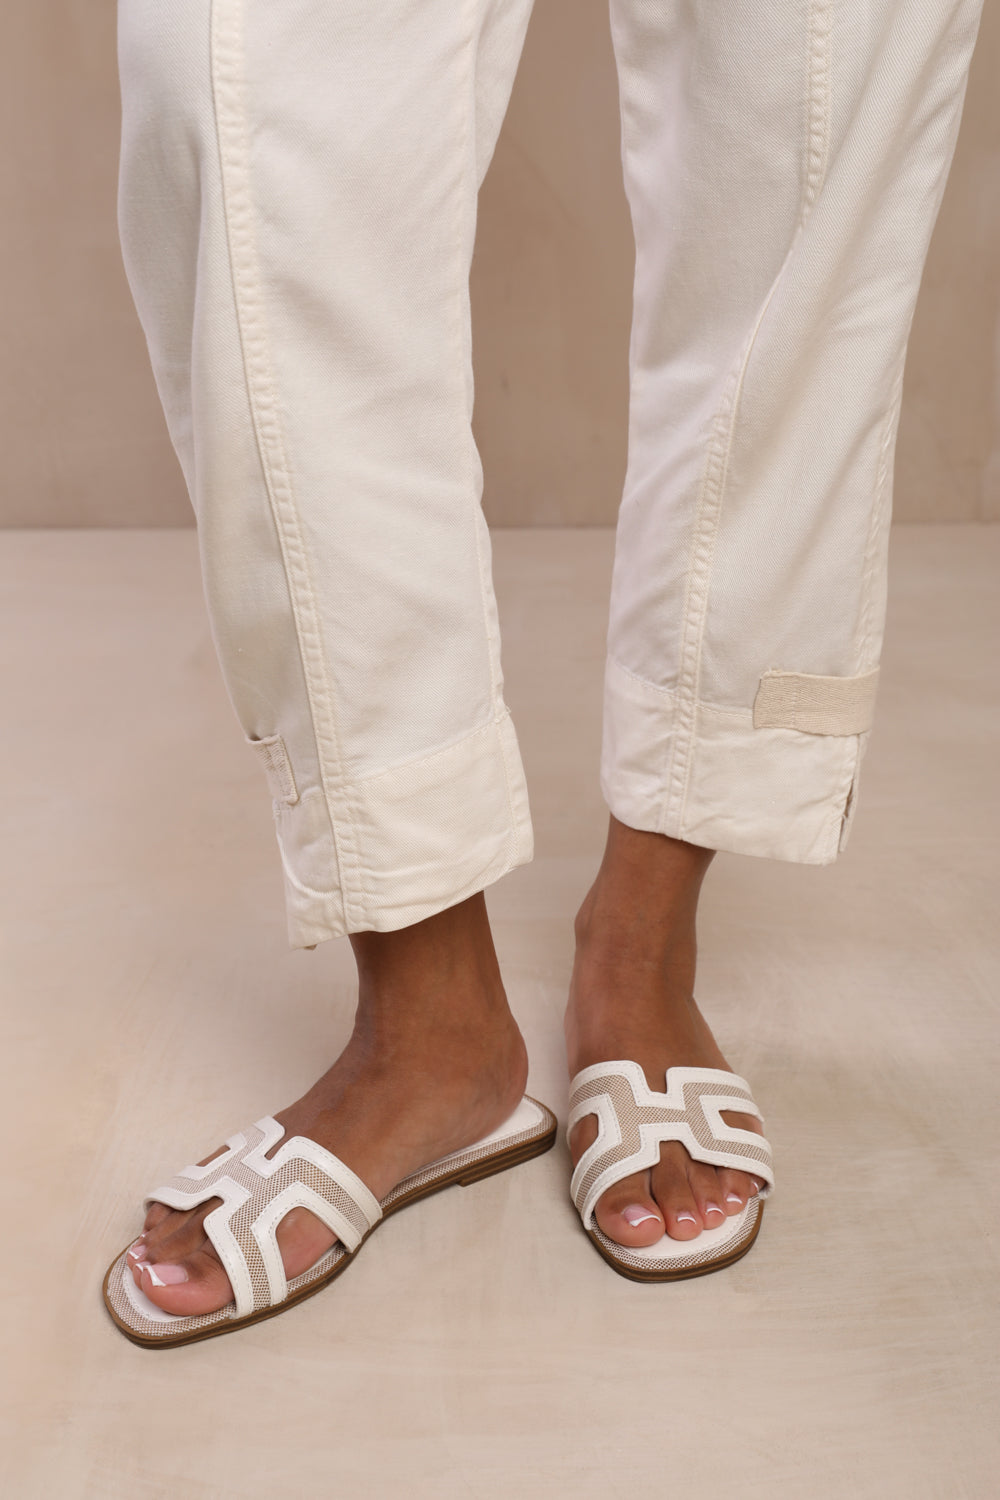 SURGE CUT OUT STRAP FLAT SANDALS IN WHITE FAUX LEATHER